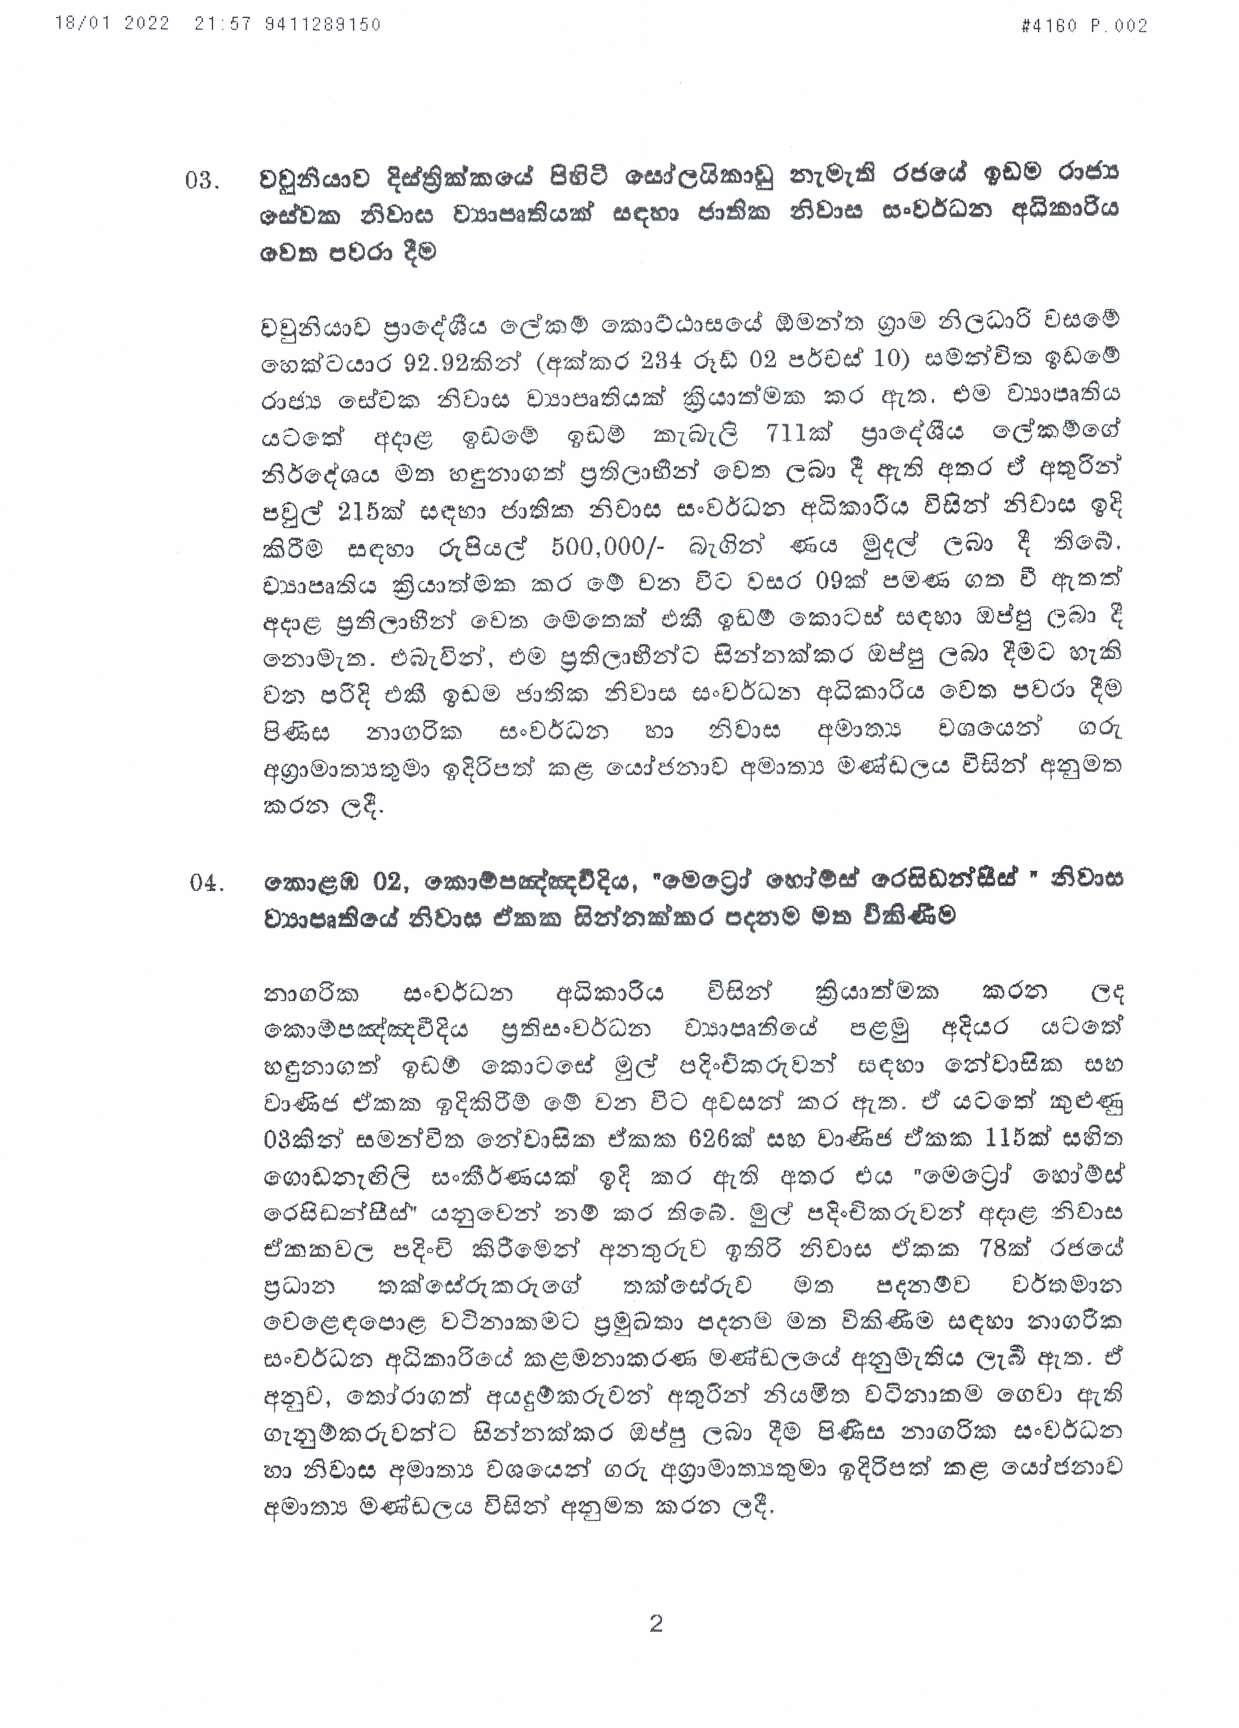 Cabinet Decision on 18.01.2022 page 002